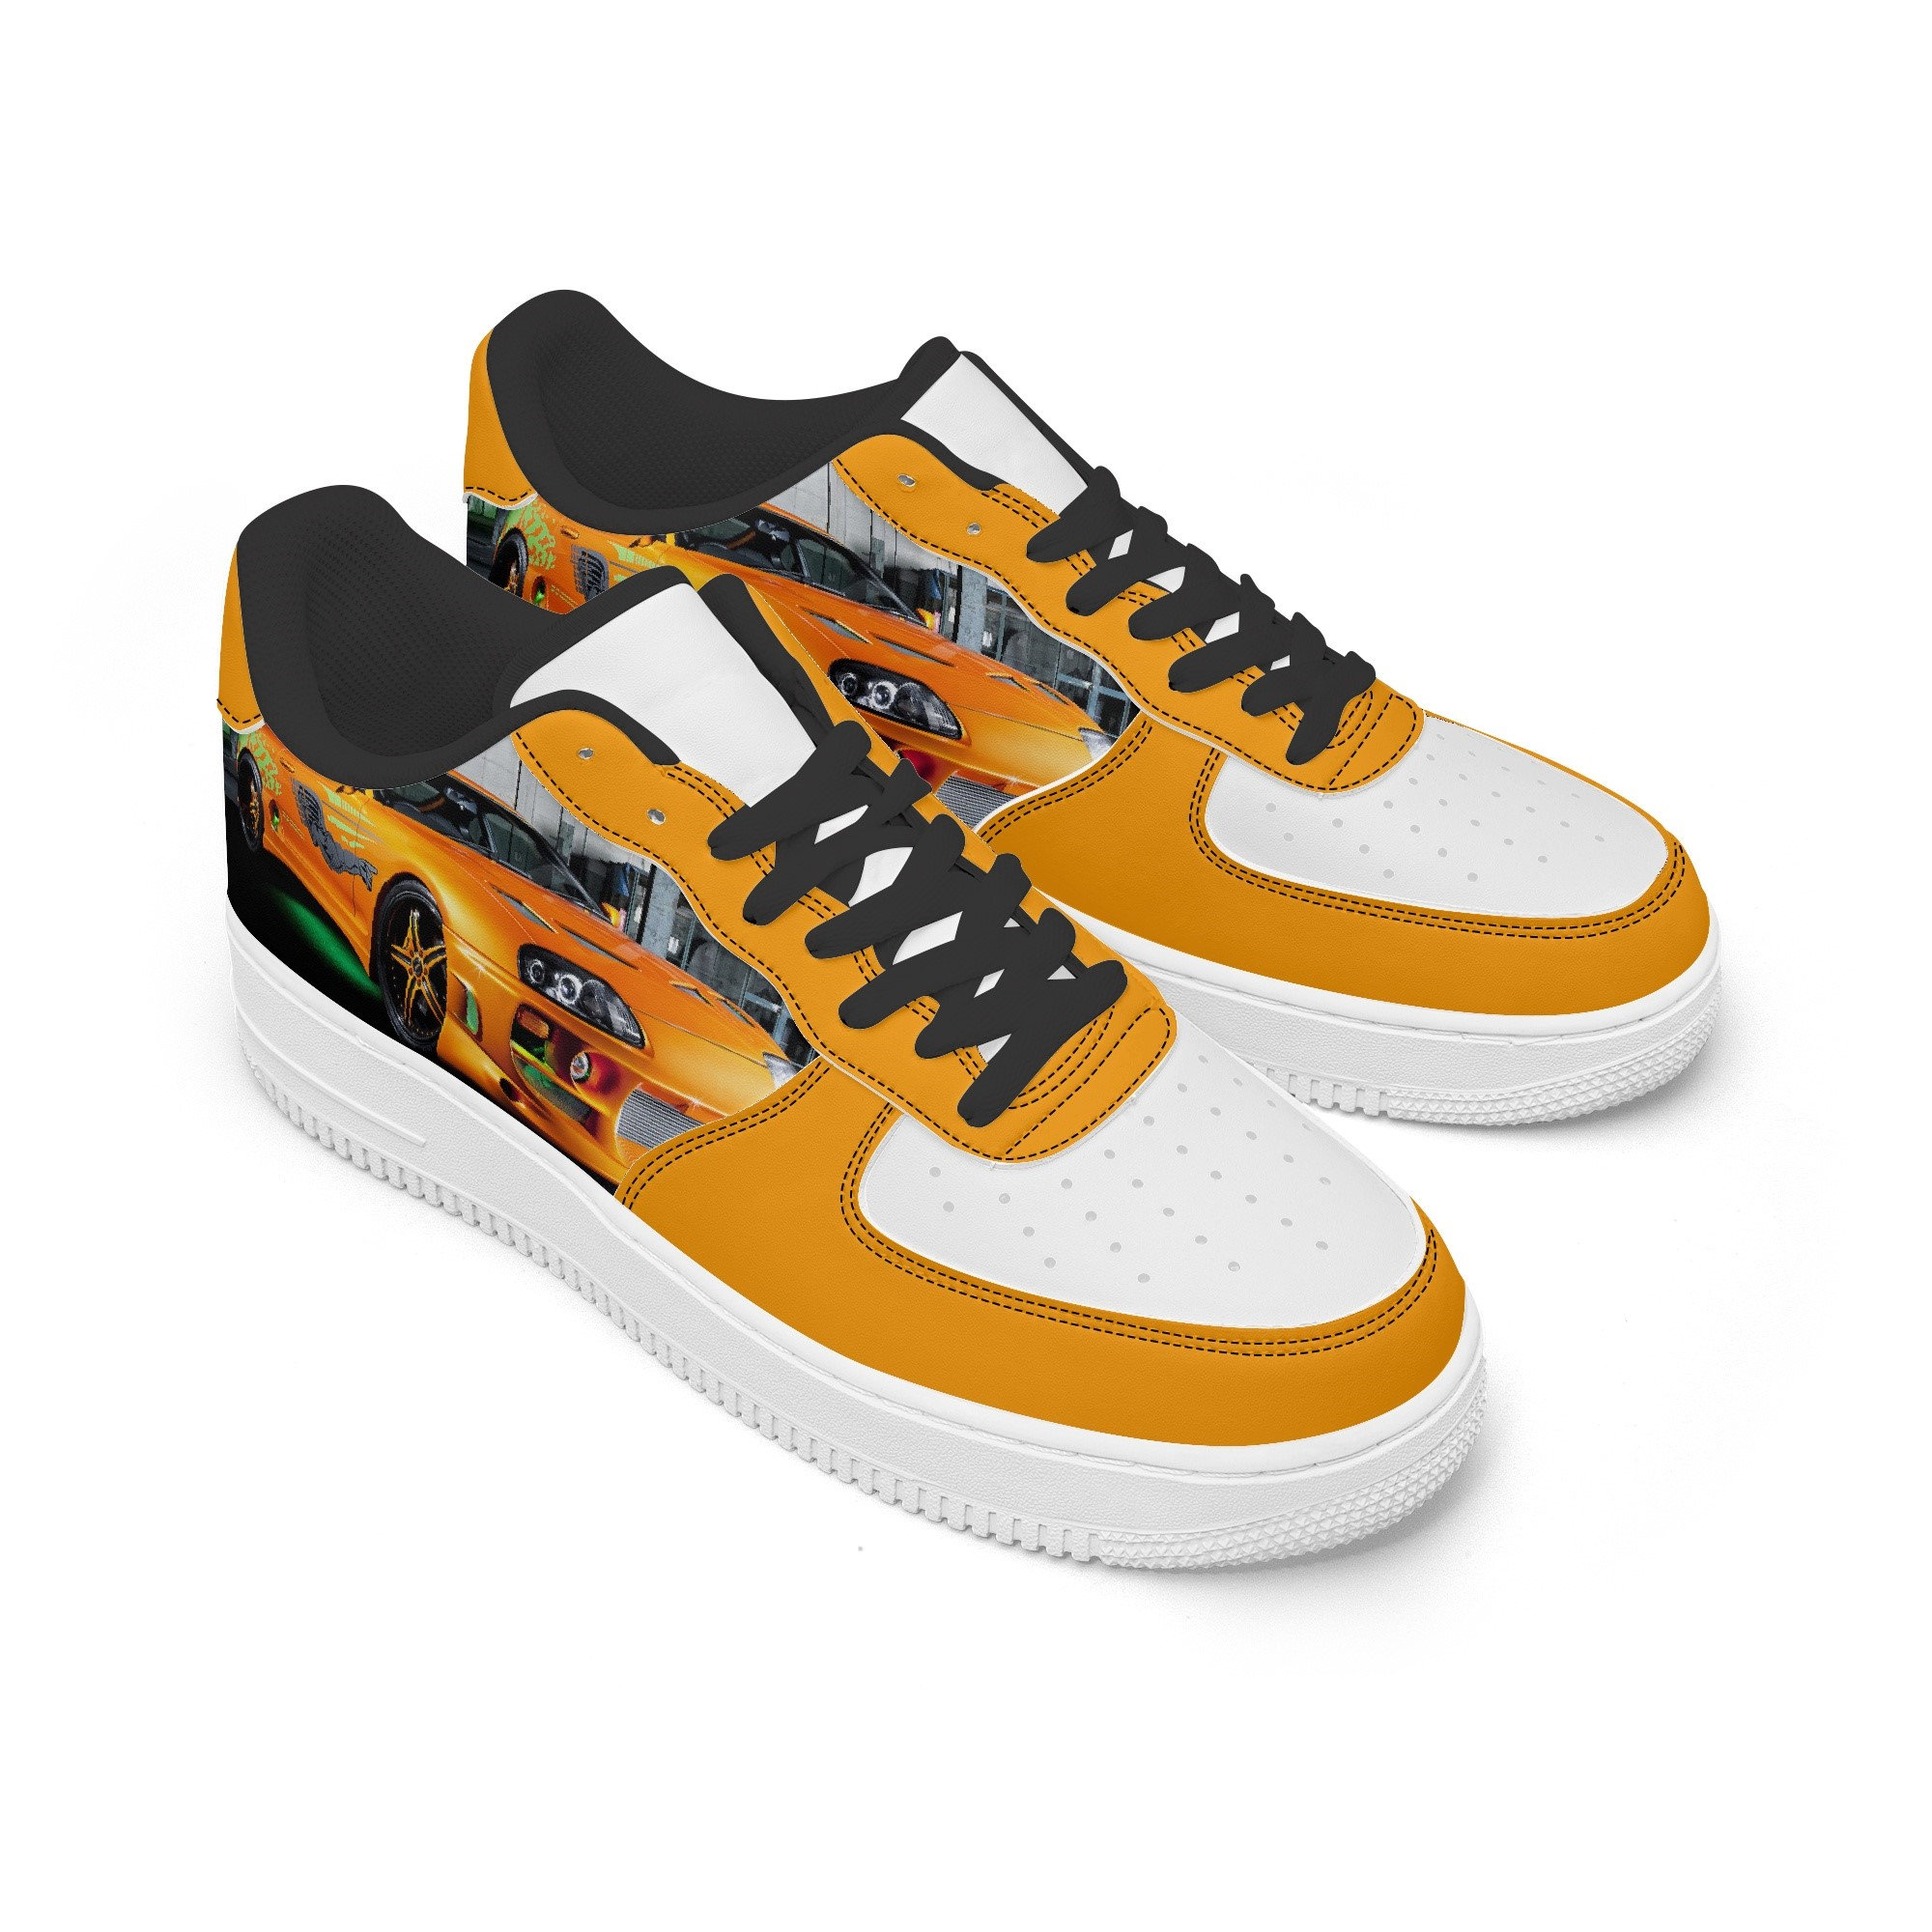 De lucht Bek Interpunctie Fast and Furious Shoes Supra Sneakers Leather Low Tops for - Etsy Finland